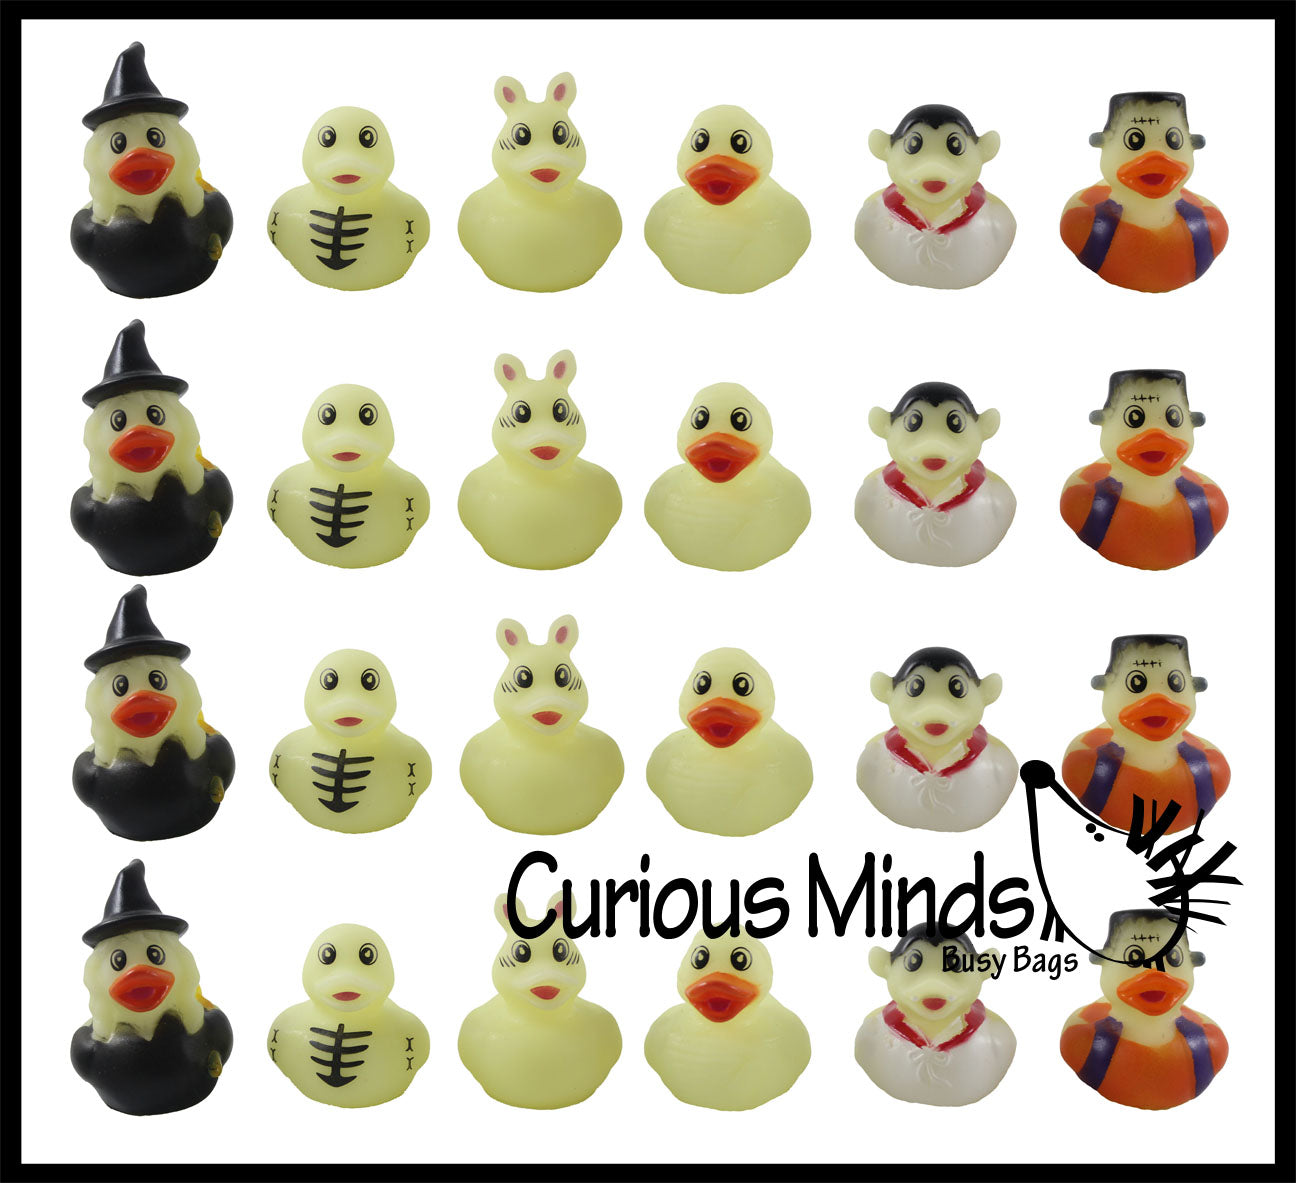 CLEARANCE - SALE -  Halloween Theme Rubber Duckies - Glow in the Dark Spooky Duck for Party or Trick or Treat